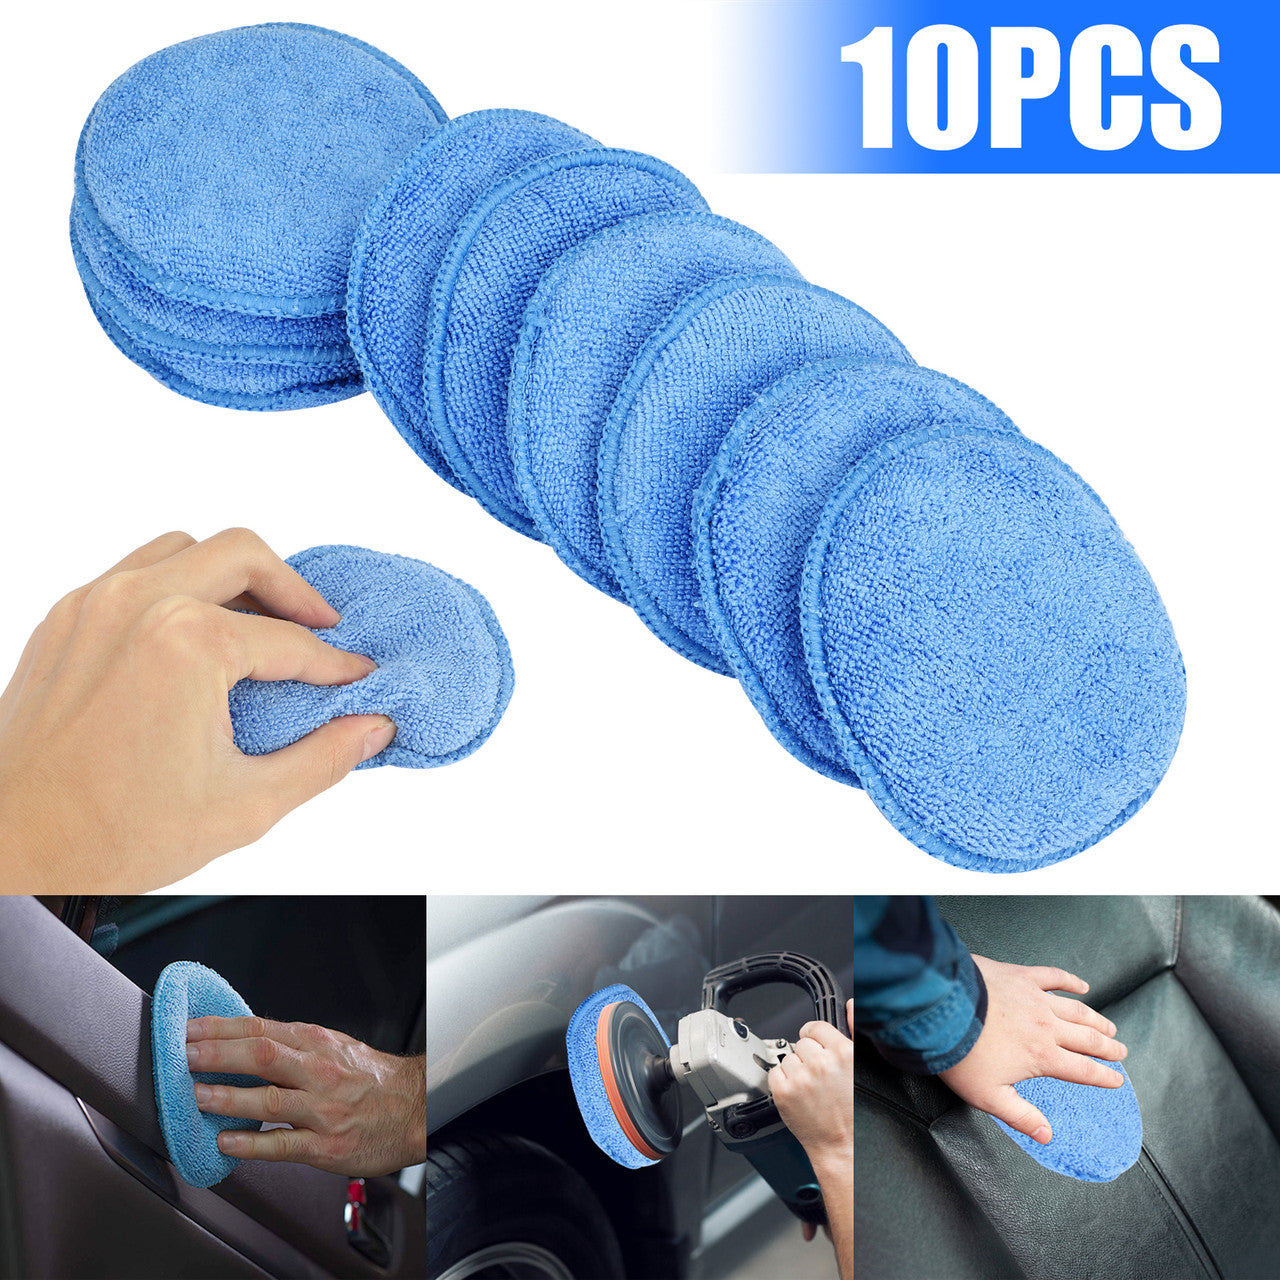 10Pcs 5" Car Wax Foam Sponge Applicator, Microfiber Applicator Cleaning Pads Car Detailing Tool for Waxing, Car Wash Cleaning Supplies for Car Interior Desk, Leather Seats, Bumpers